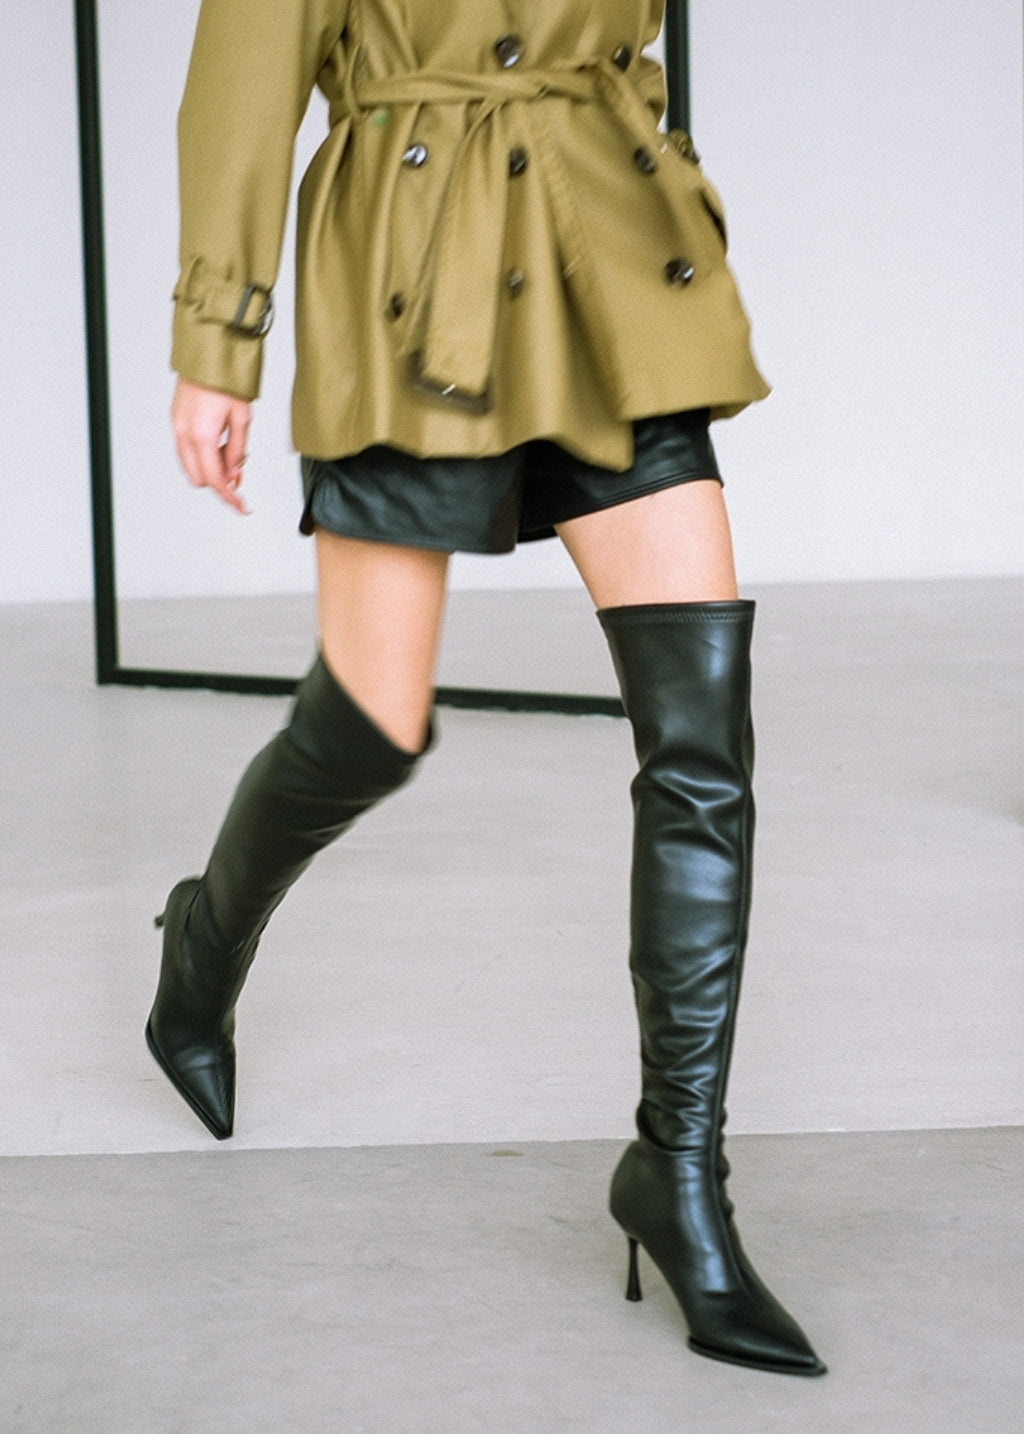 Pointed Toe Stiletto High Heel Leather Over-The-Knee Boots